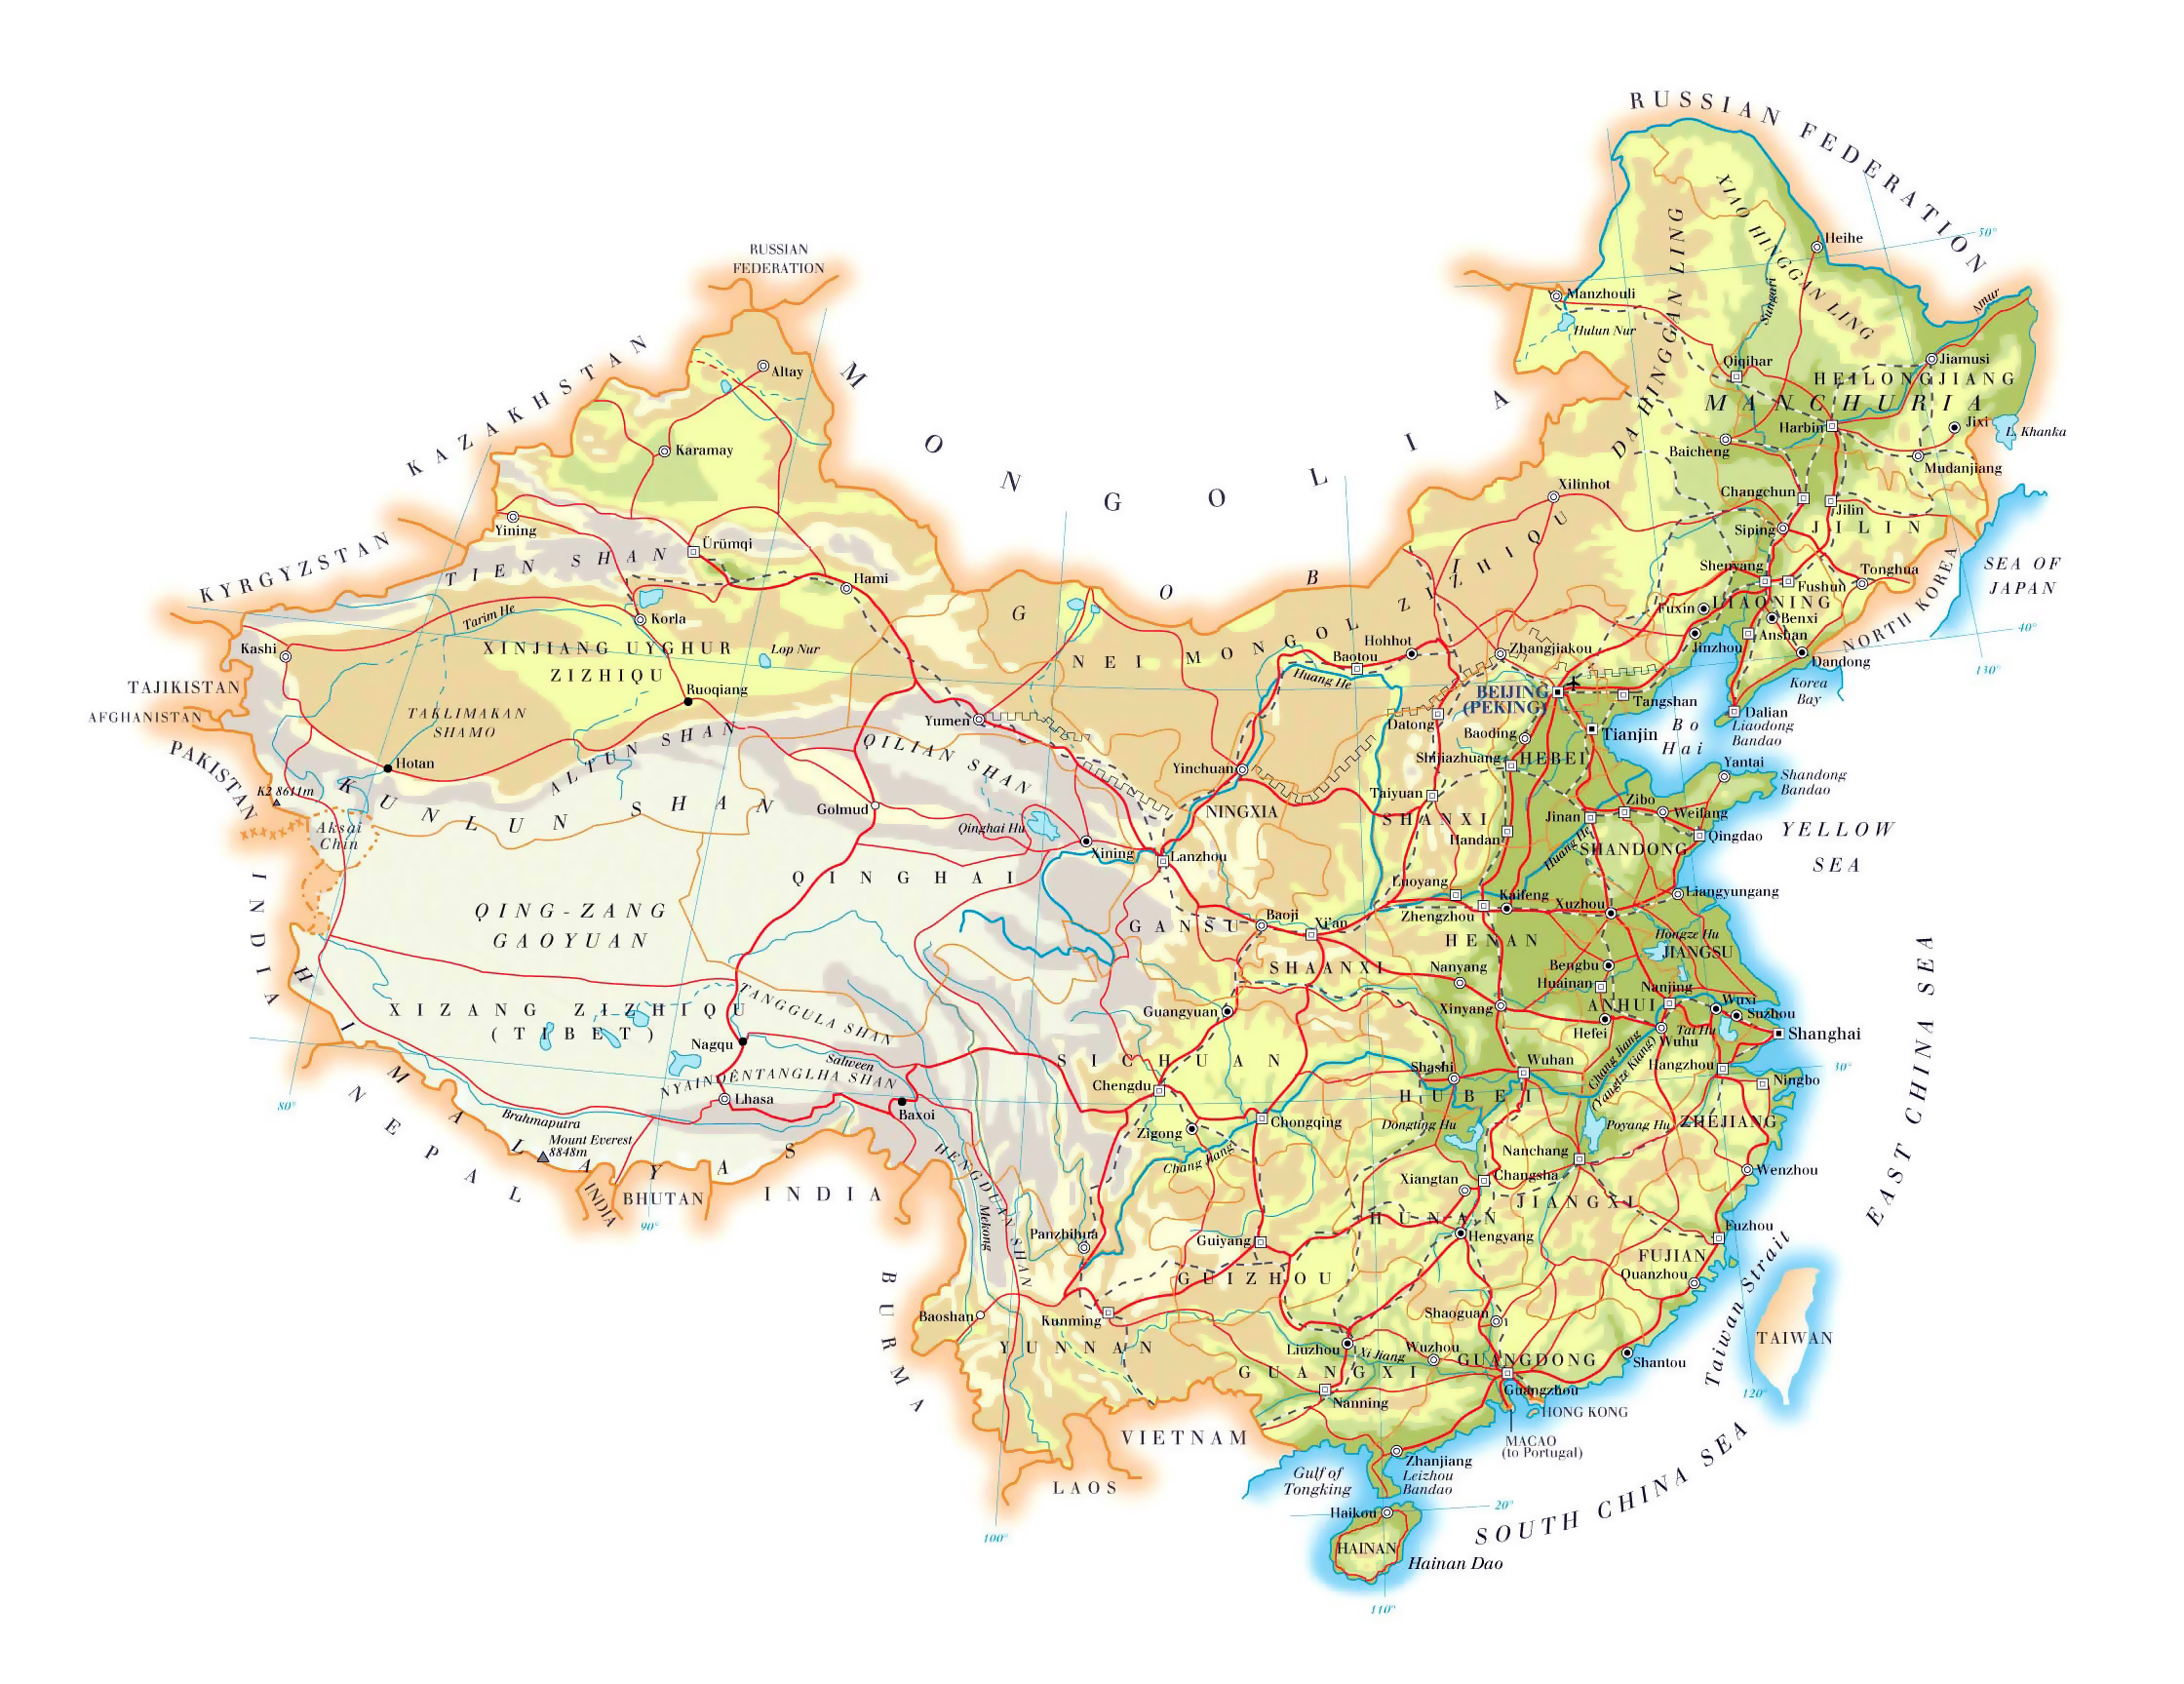 Large Elevation Map Of China With Roads Cities And Airports China Asia Mapsland Maps Of The World